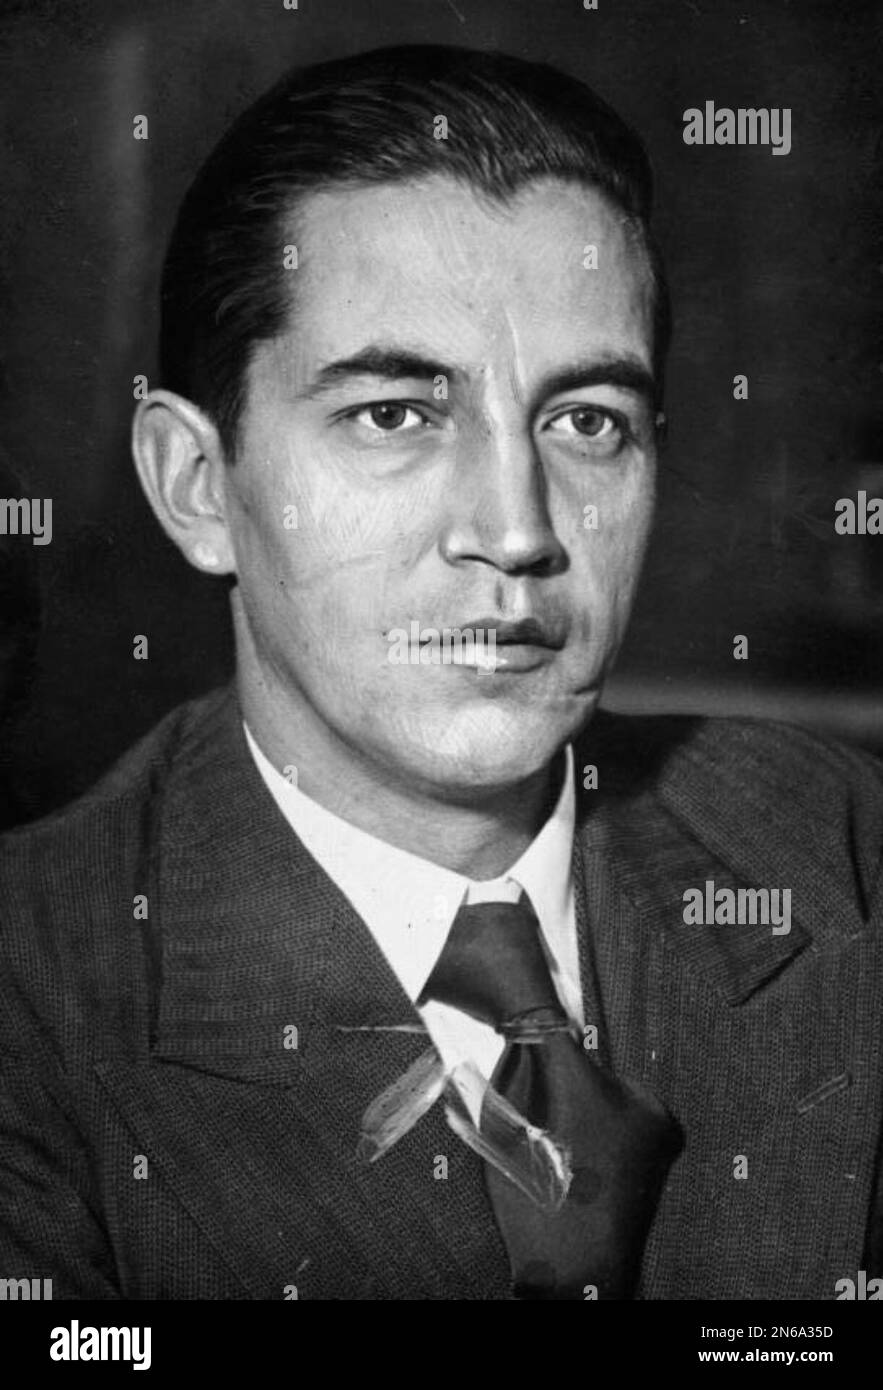 Rudolf Diels who was the first head of the Nazi stae's secret police the Gestapo. The scars are duelling scars that were considered a mark of virility in the early 20th century. Photo By Bundesarchiv, Bild 183-K0108-0501-003 / CC-BY-SA 3.0, CC BY-SA 3.0 de, https://commons.wikimedia.org/w/index.php?curid=5364918 Stock Photo